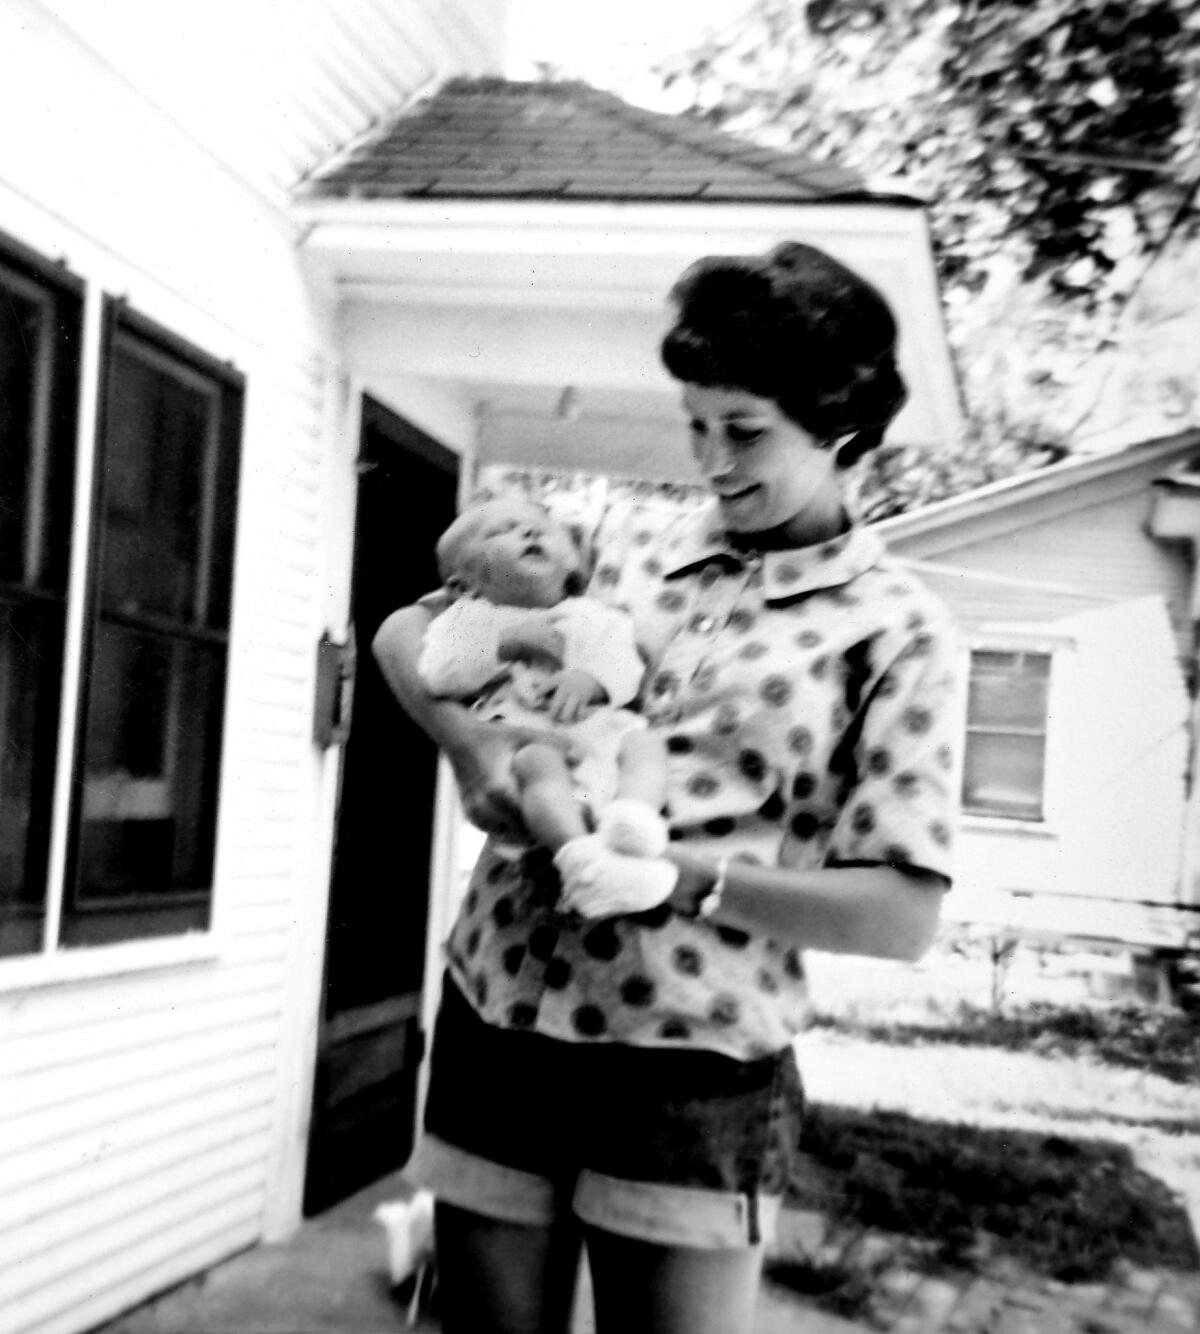 Patricia Hamlin holds her 5-month-old son, Kevin, at their home in Wichita, Kan., in 1962.